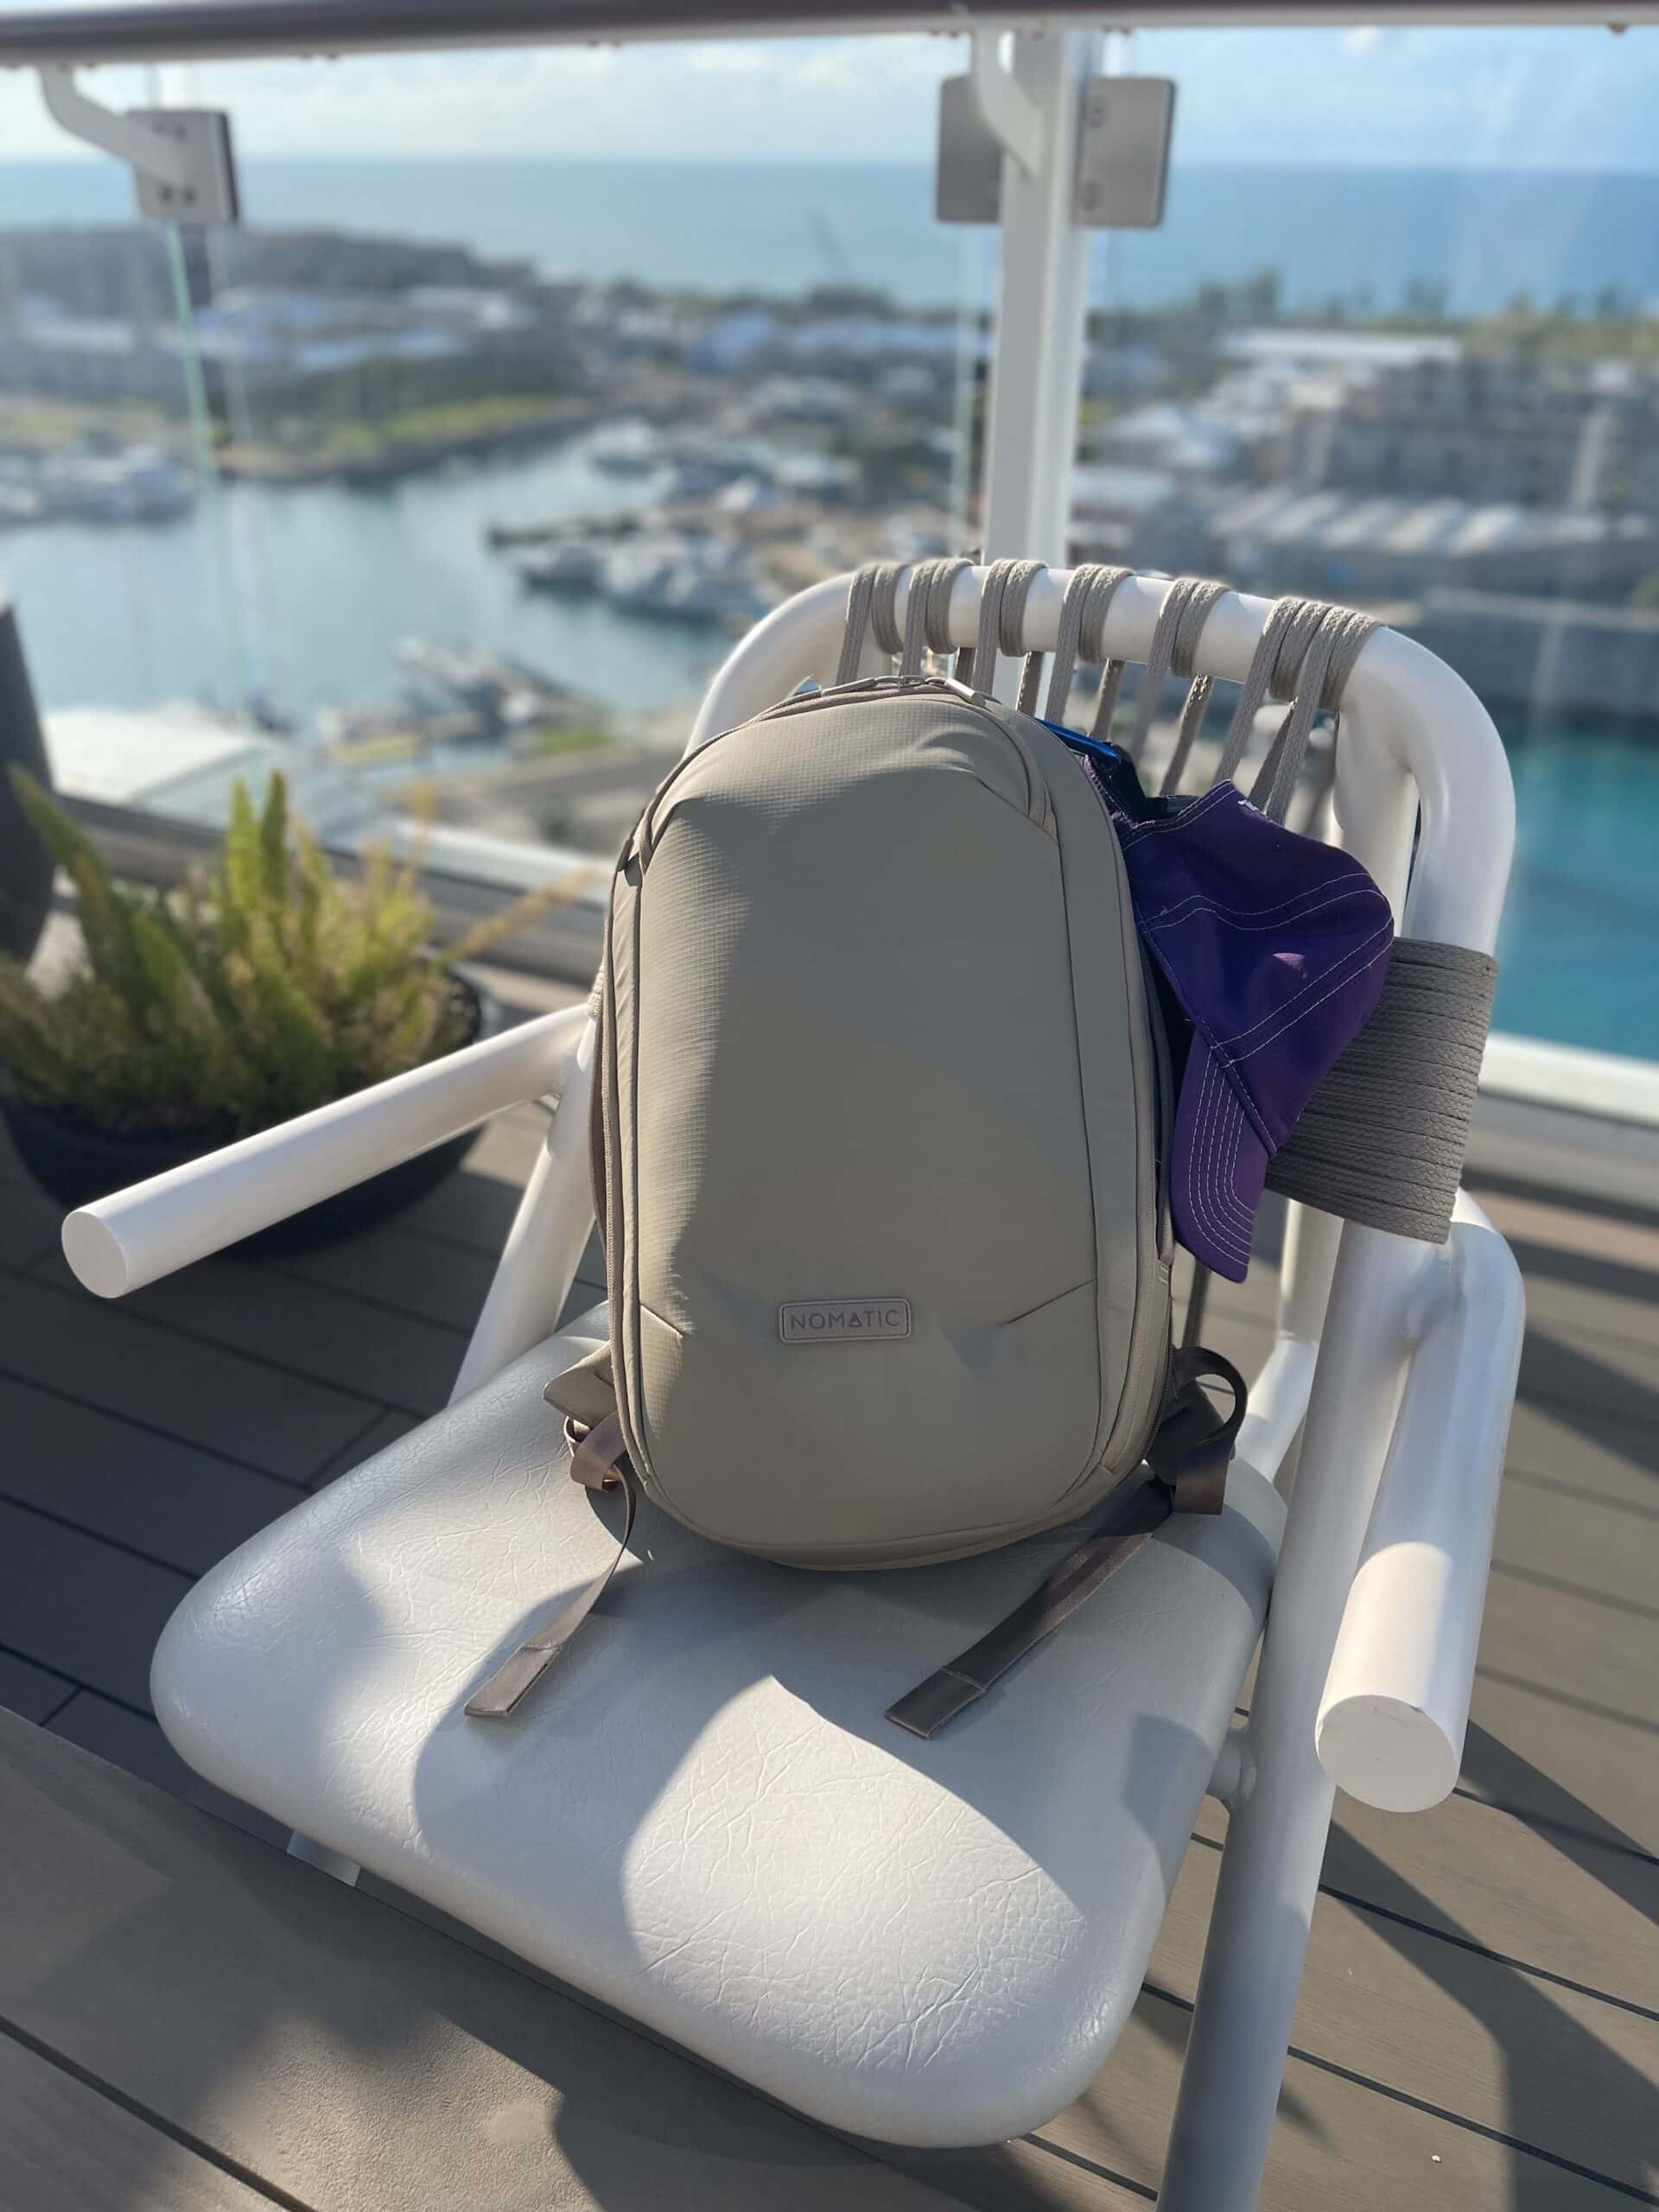 sand colored backpack from Nomatic in chair